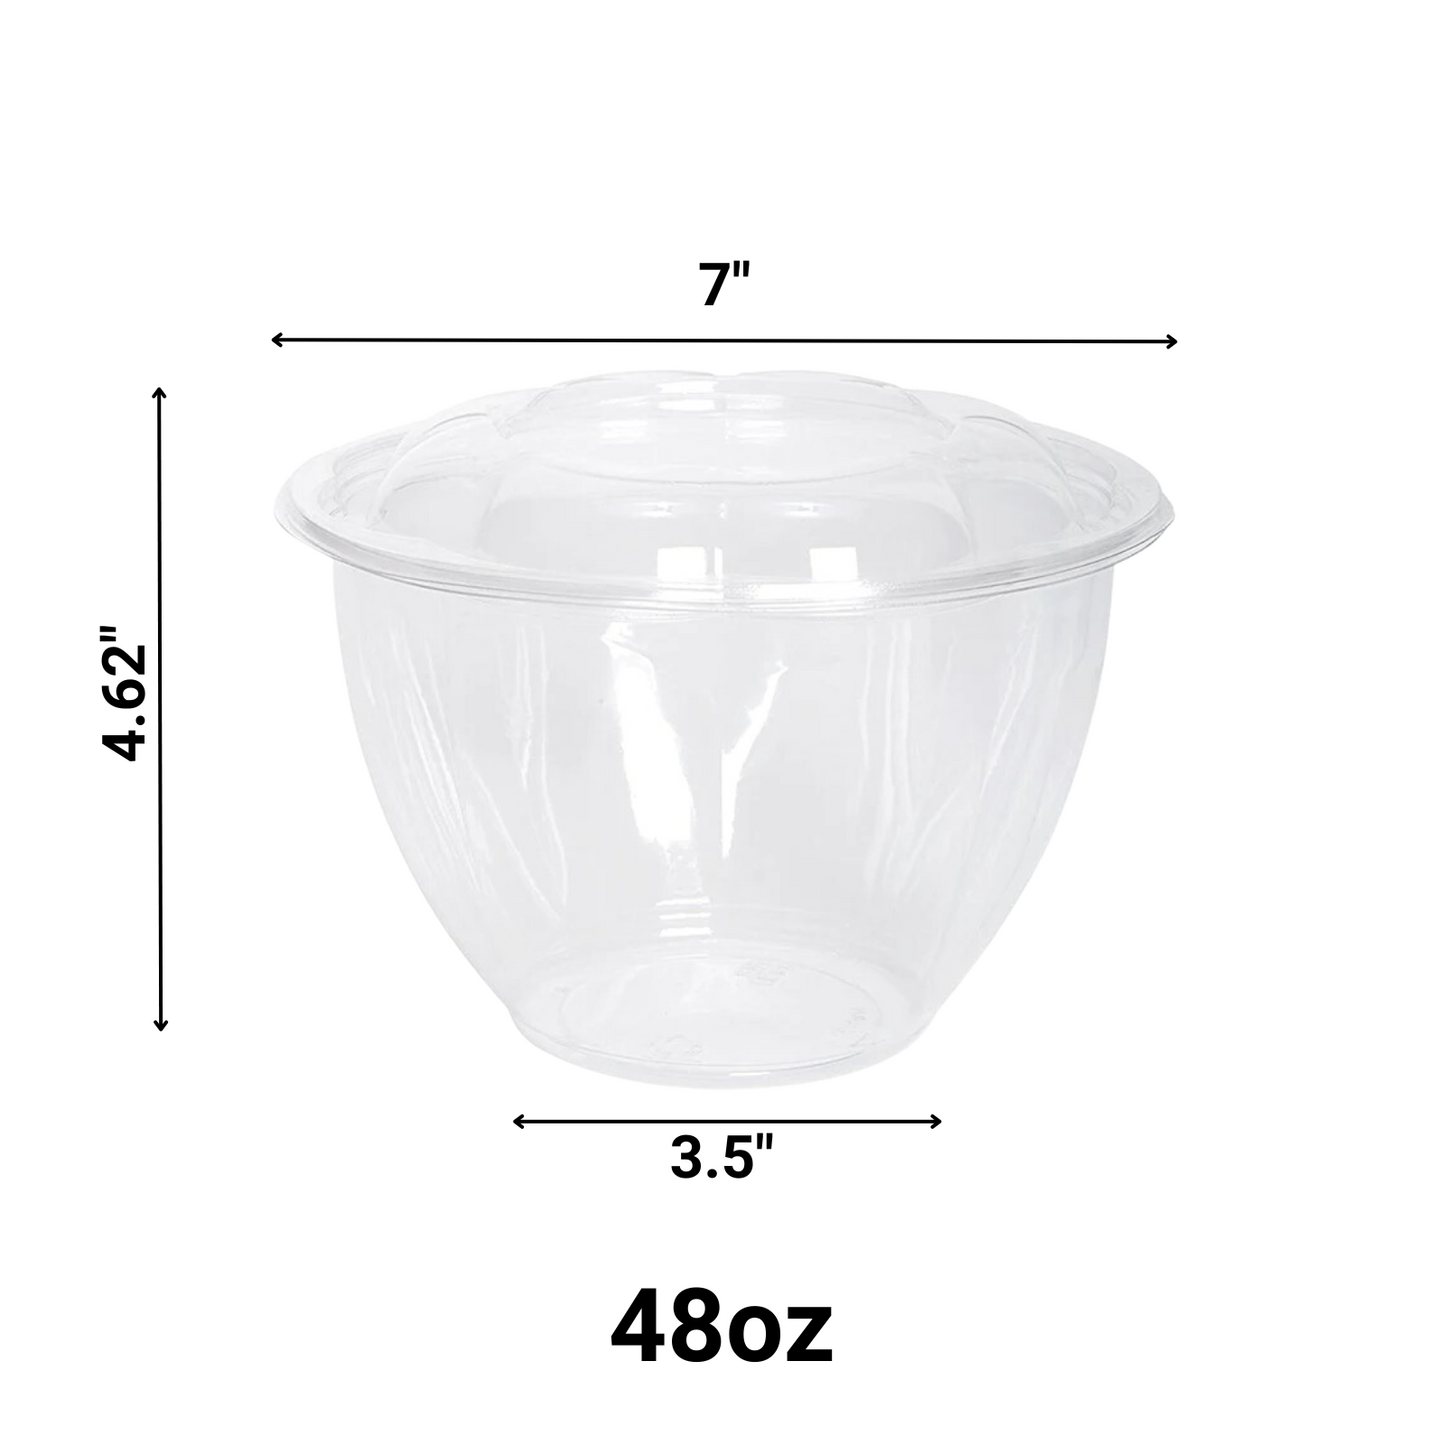 *WHOLESALE* 48oz. Rose / Salad Bowls To-Go Containers with lids | 150 ct/case Smoothie Cups VeZee   